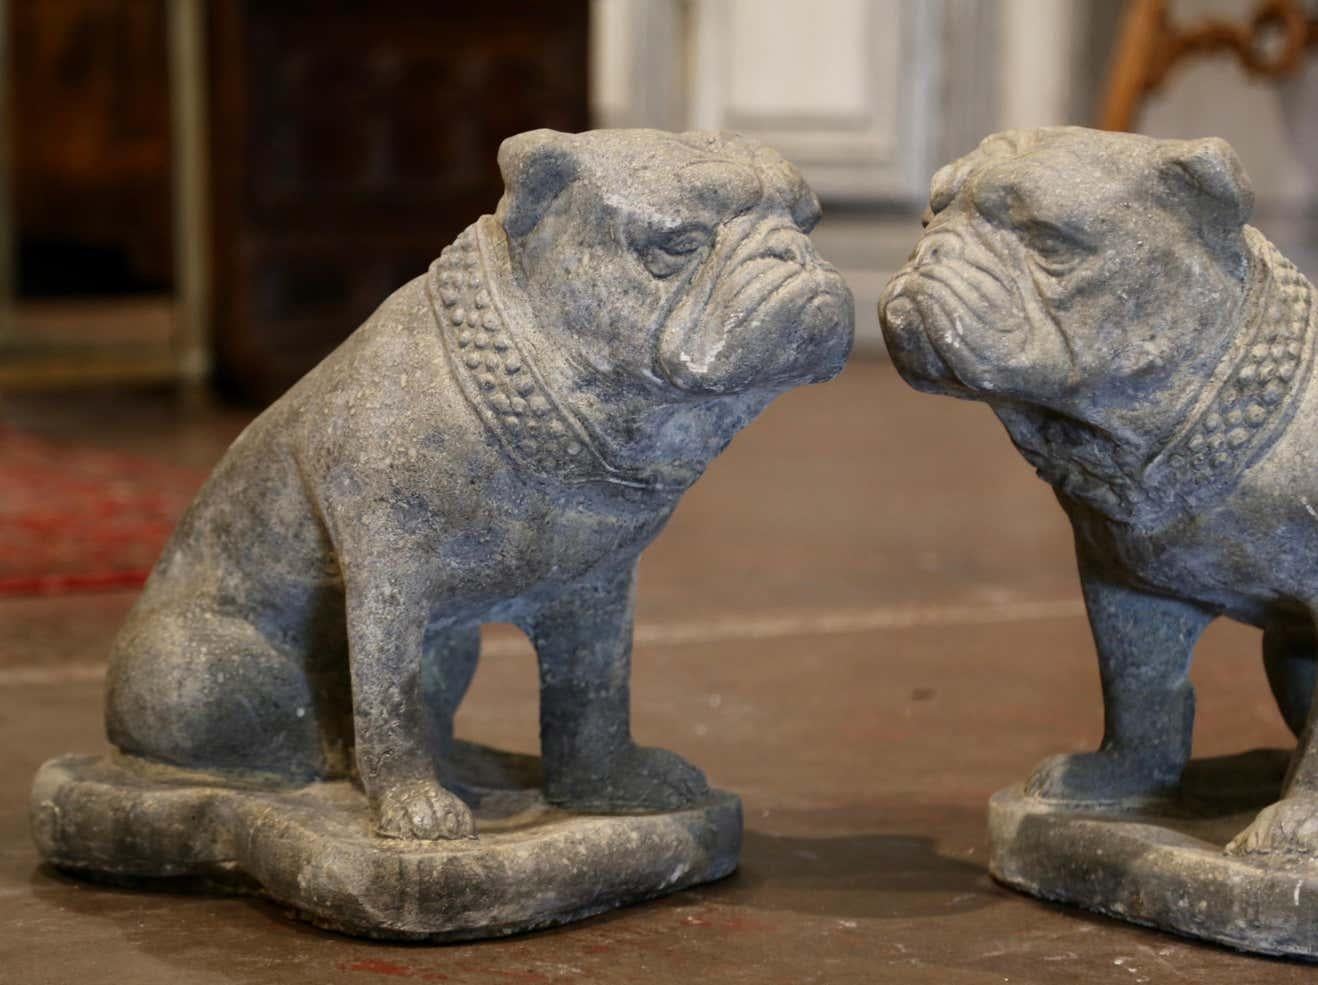 Carved of stone in France circa 1980 and set on a shaped base, the vintage garden figures feature two English bulldogs sitting on their back legs. The dogs dressed with a thick studded collar around the neck have wonderful facial expressions. The